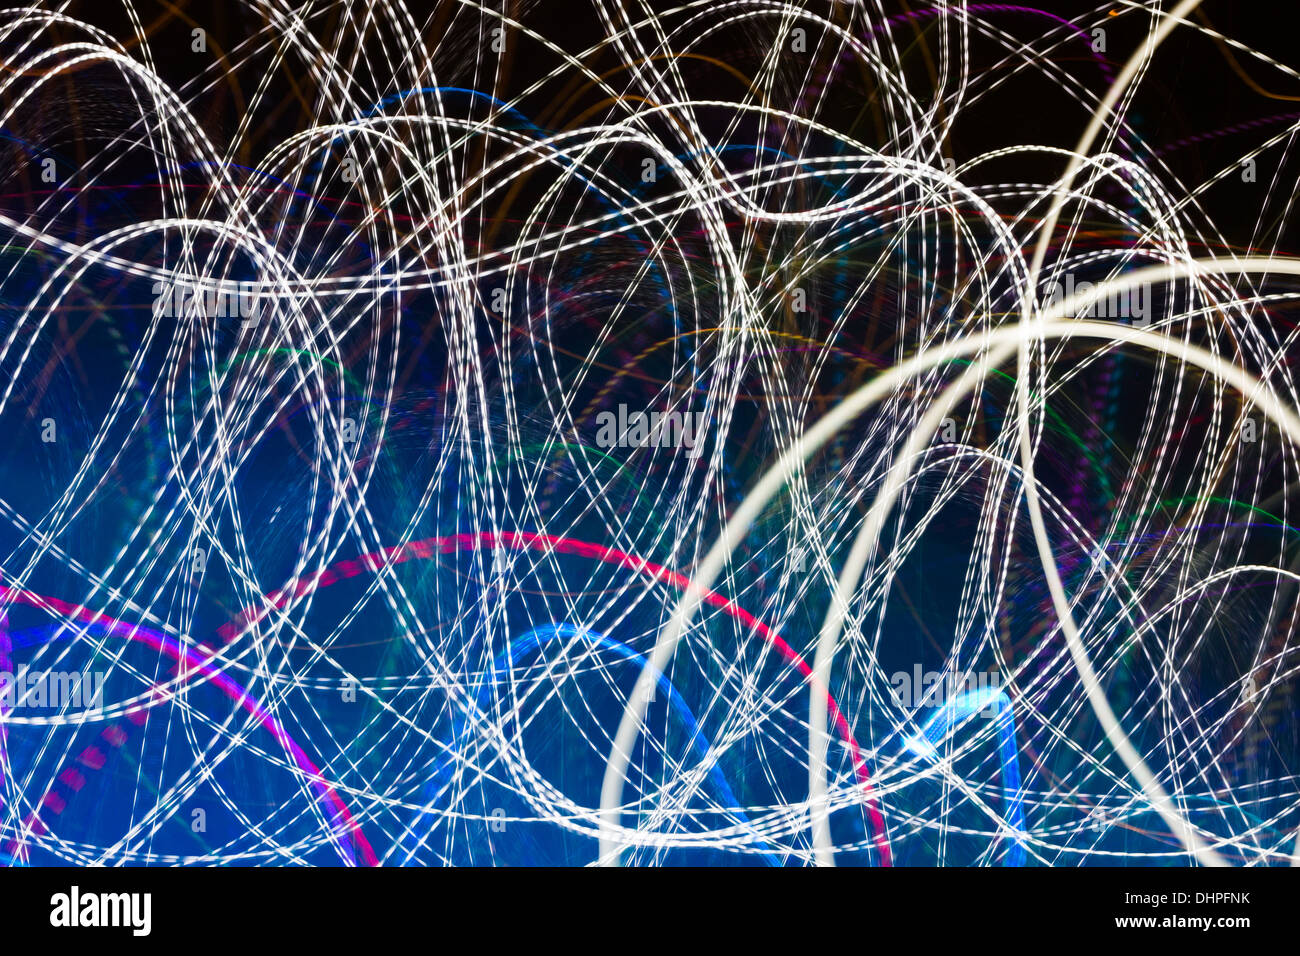 Abstract image of colored lights with movement Stock Photo